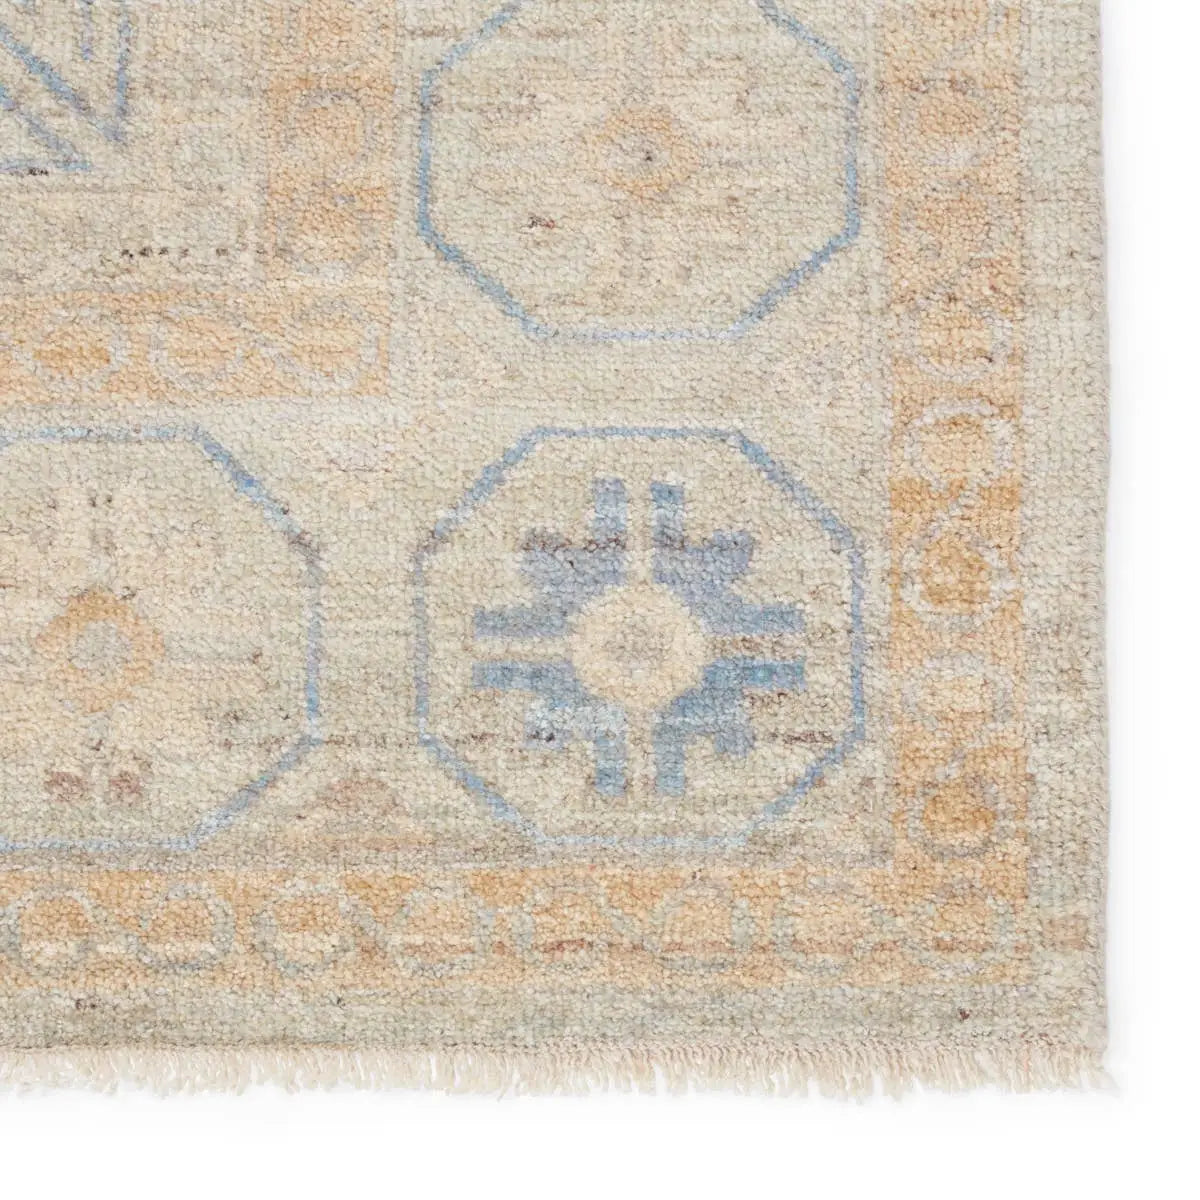 The Orenda collection features heirloom-quality designs of muted and uniquely updated Old World patterns. The Cerelia area rug boasts a beautifully washed medallion motif with ornate and fine-lined details. Amethyst Home provides interior design services, furniture, rugs, and lighting in the Miami metro area.